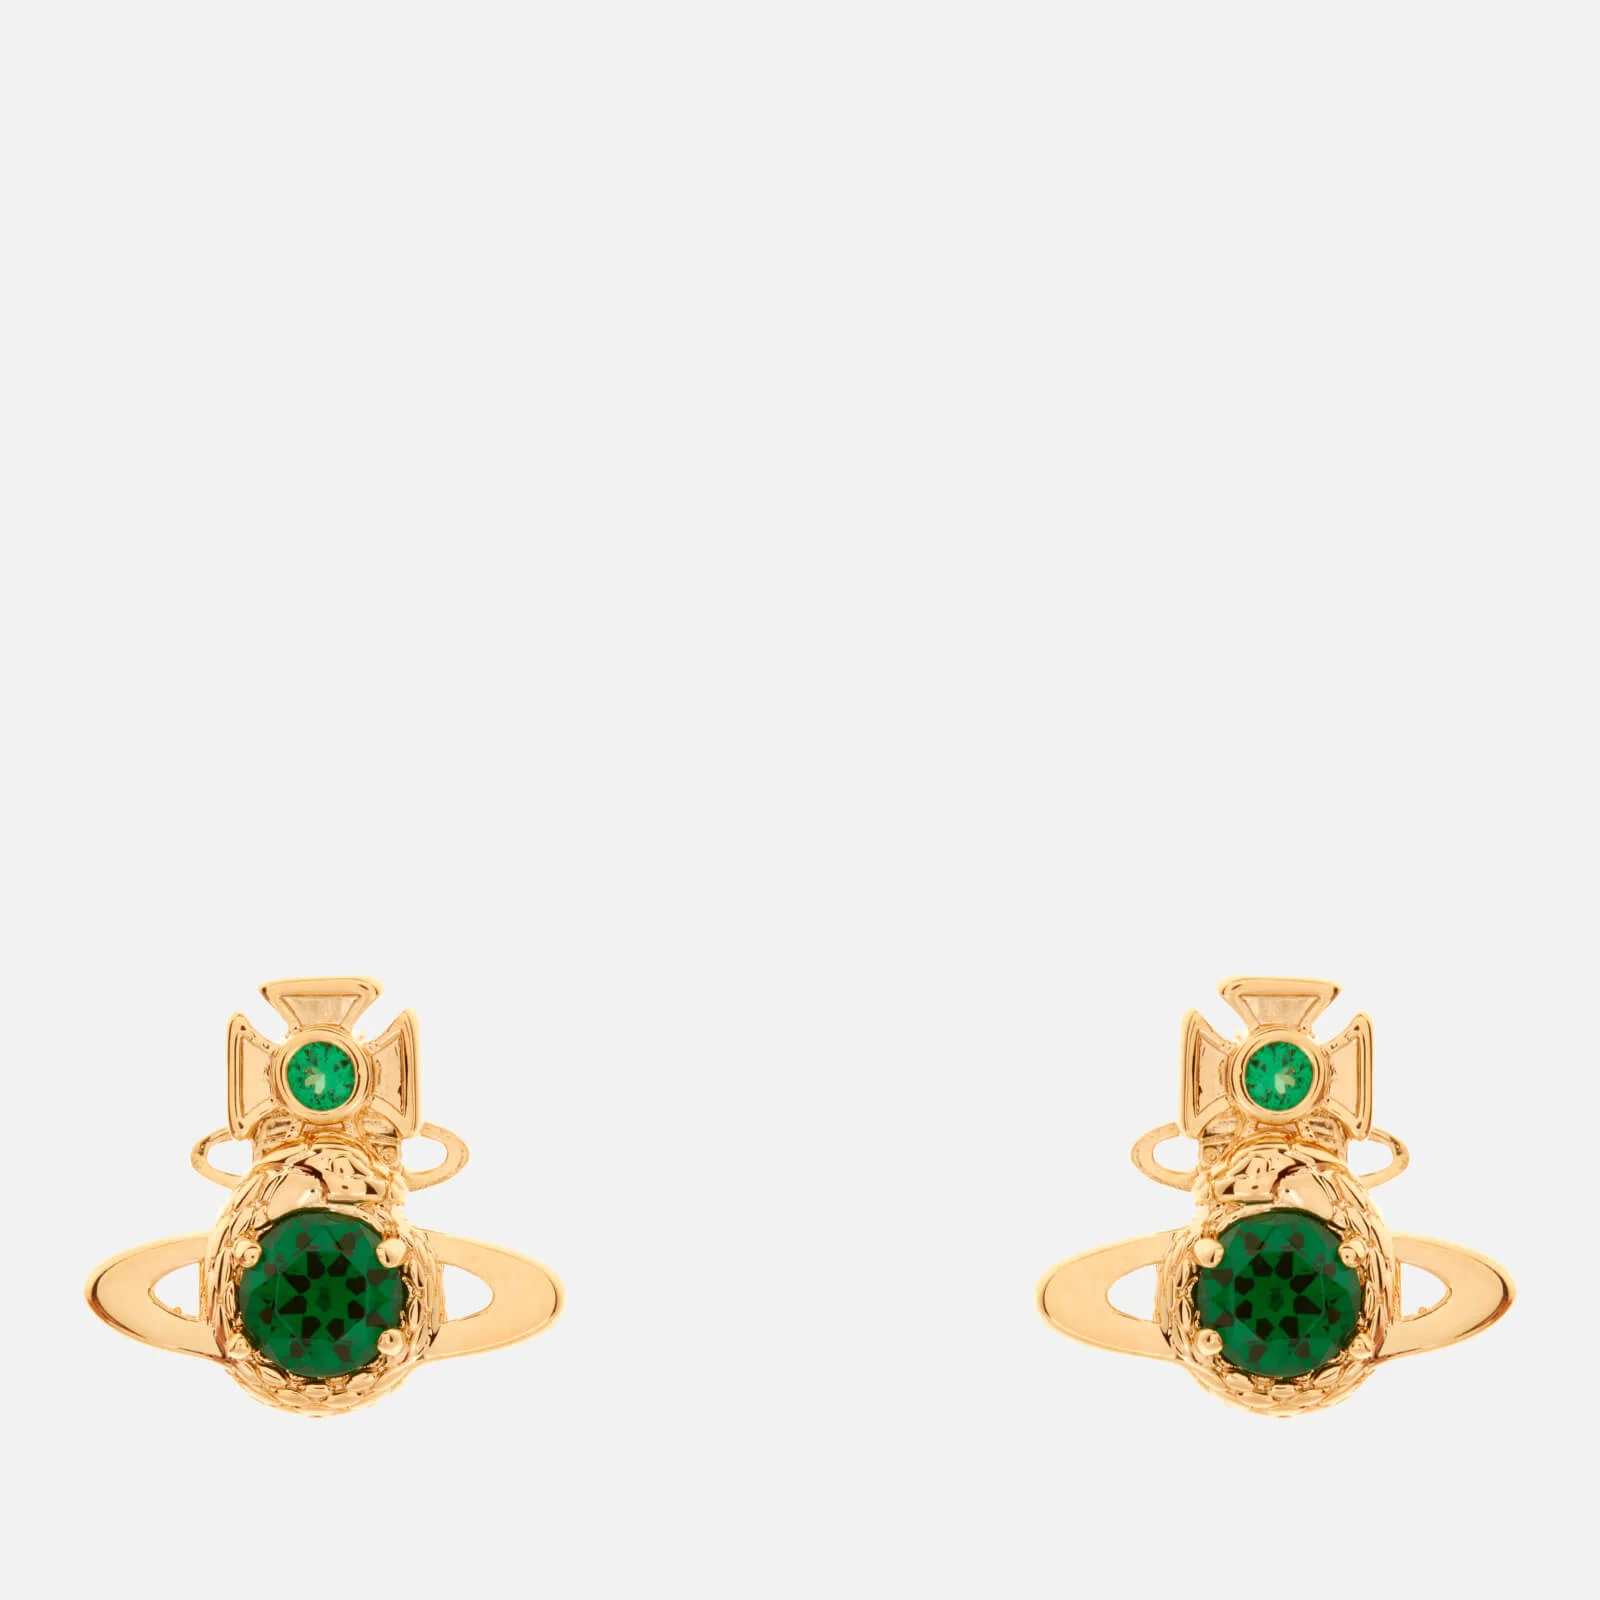 Vivienne Westwood Women's Ouroboros Small Earrings - Gold Emerald Image 1